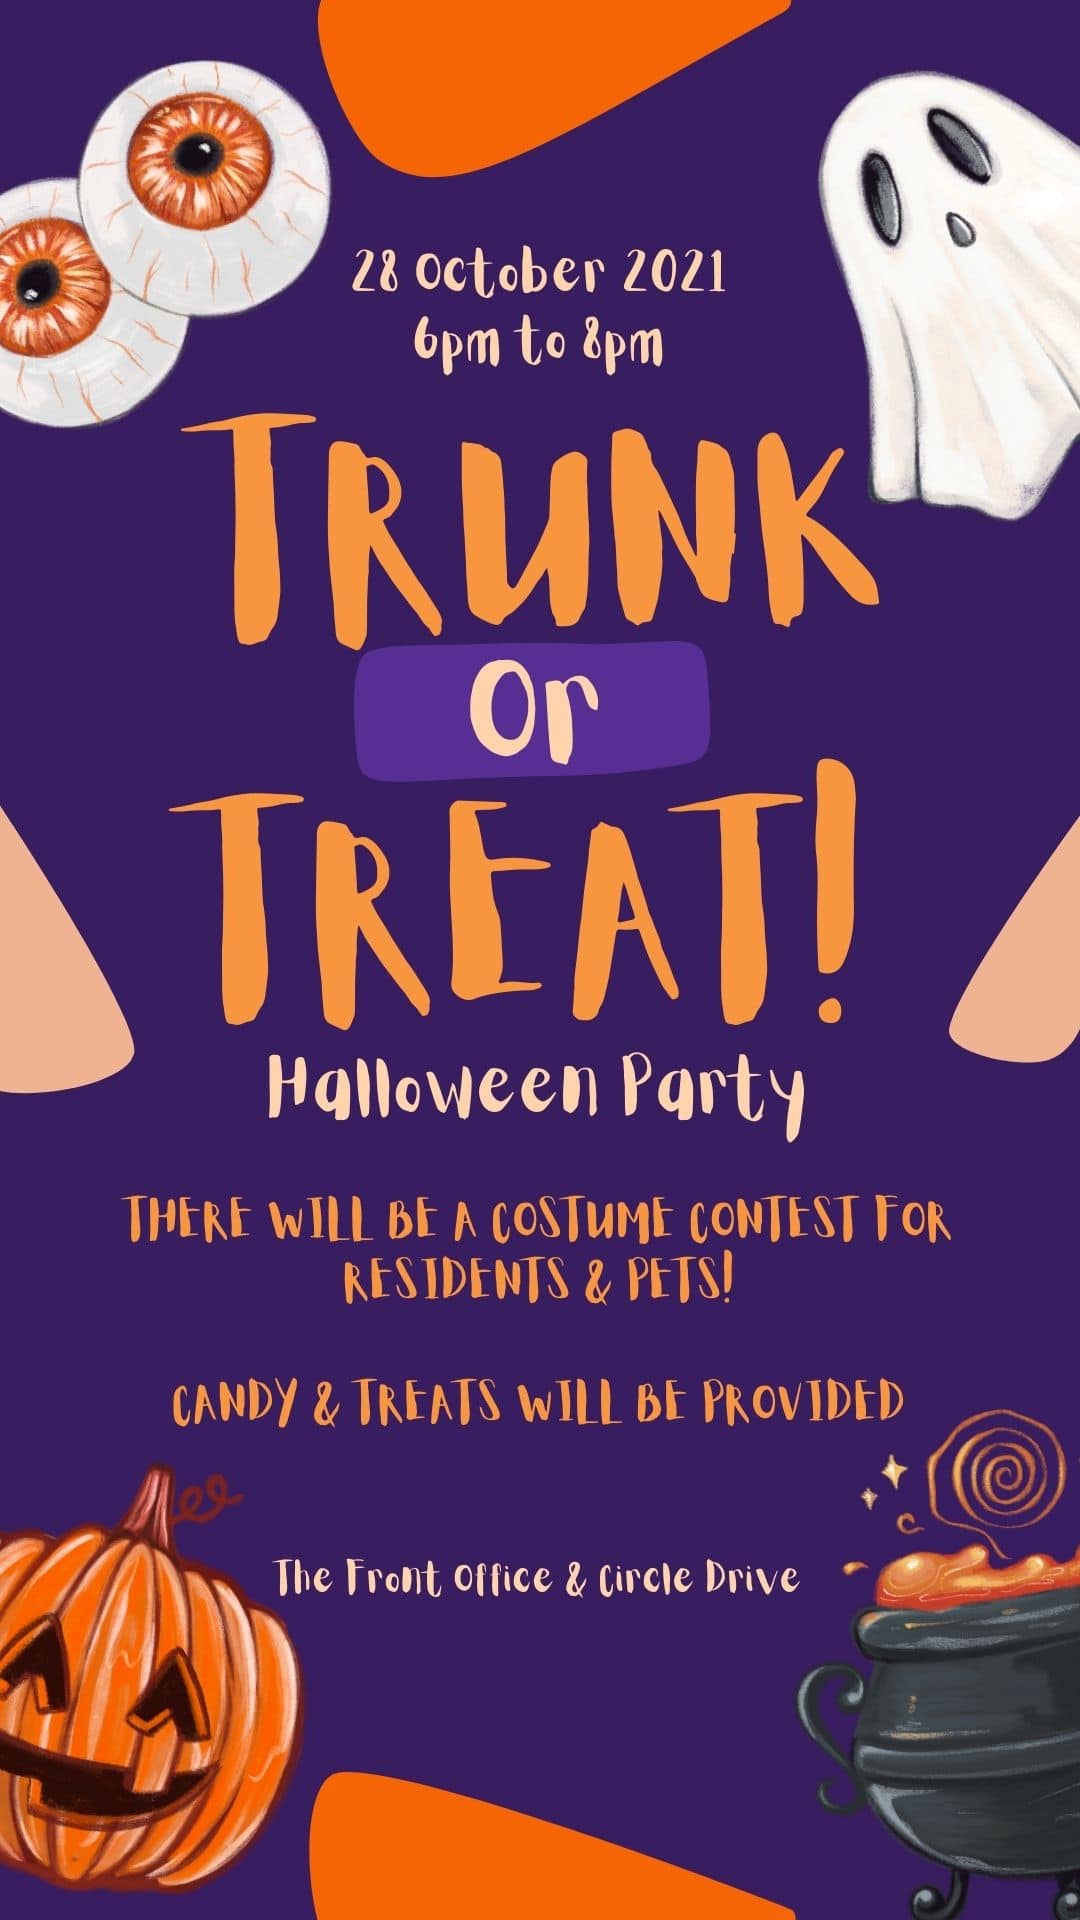 Trunk or treat Halloween party flyer for apartments in The Woodlands TX.